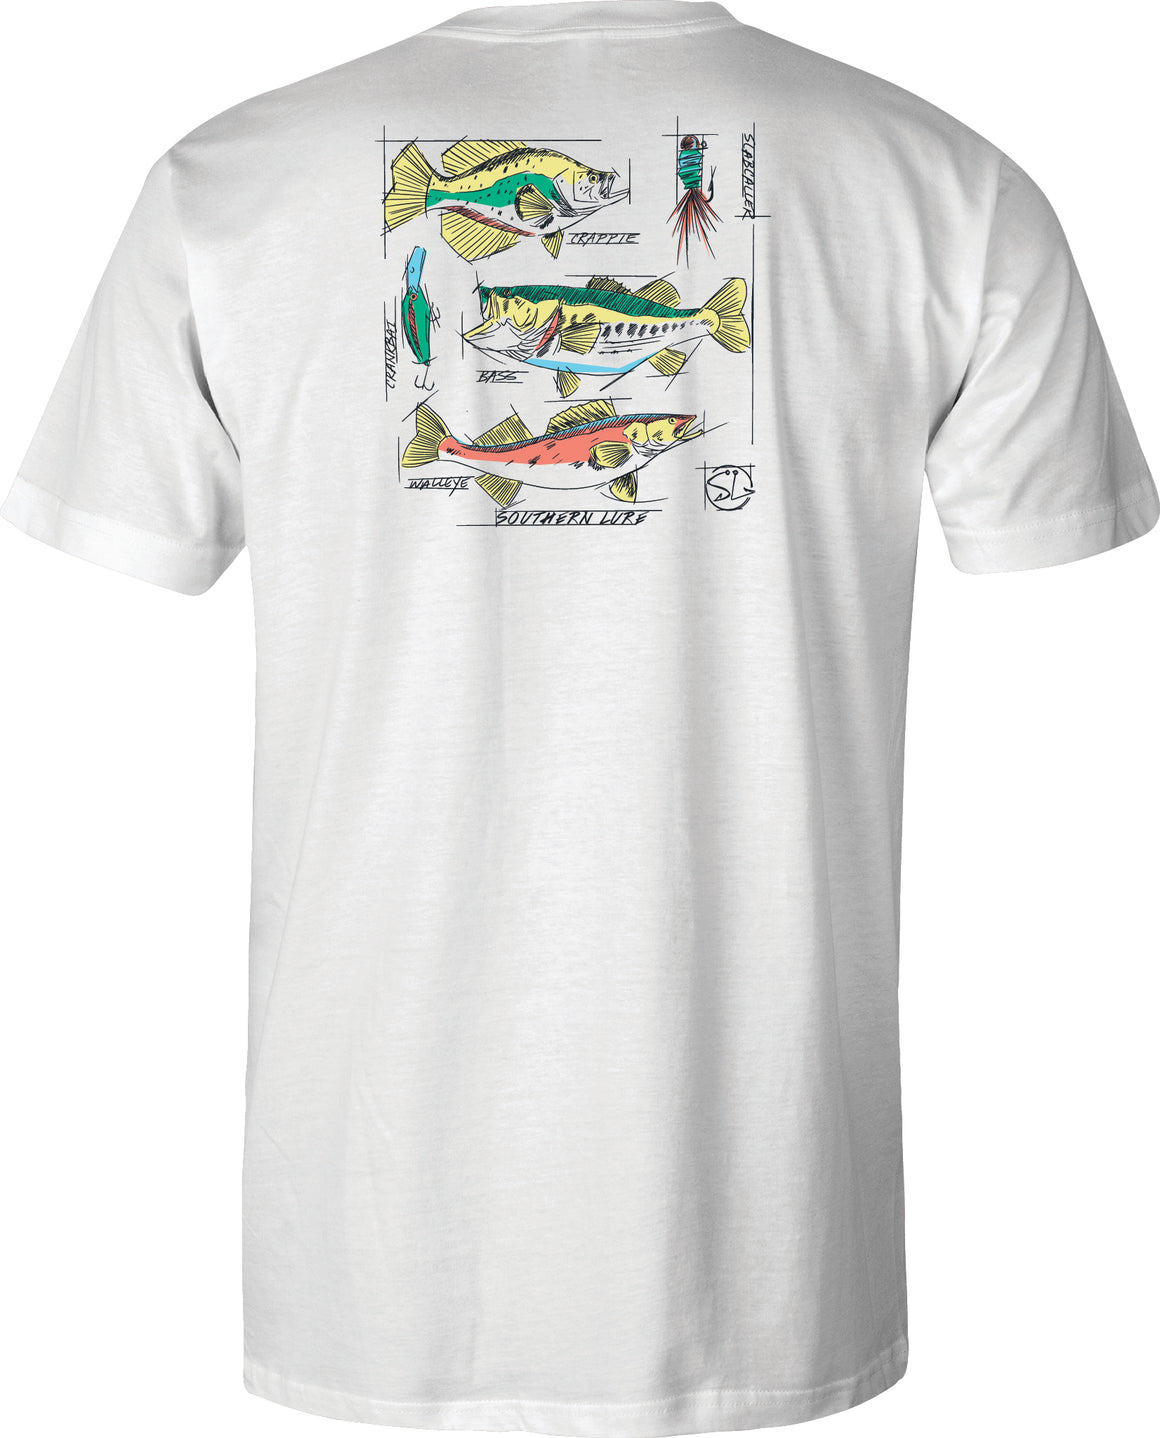 Youth & Toddler Short Sleeve Tee Gear - White